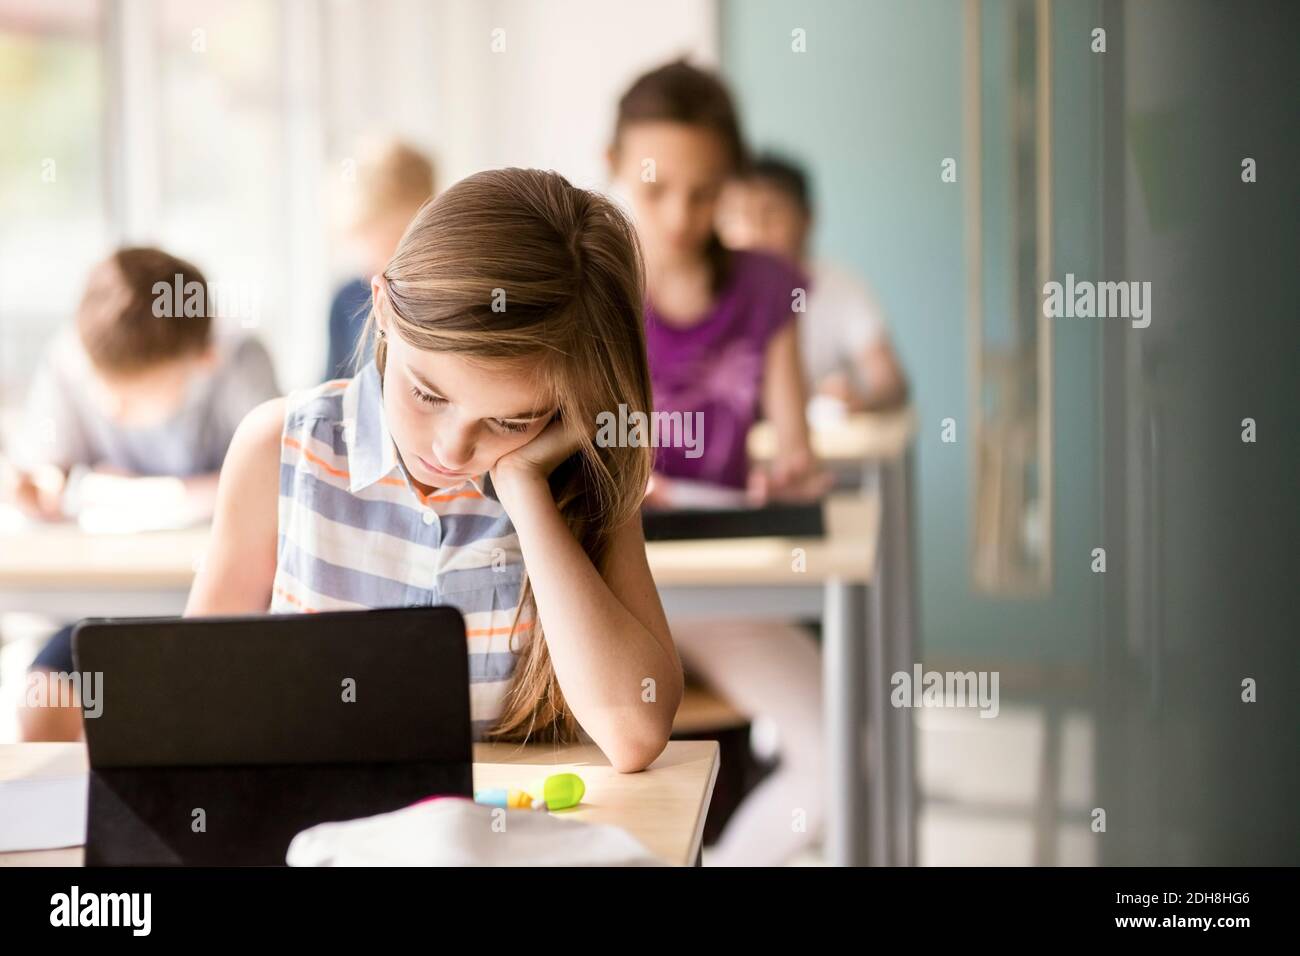 Schoolgirl studying at desk with students in classroom Stock Photo